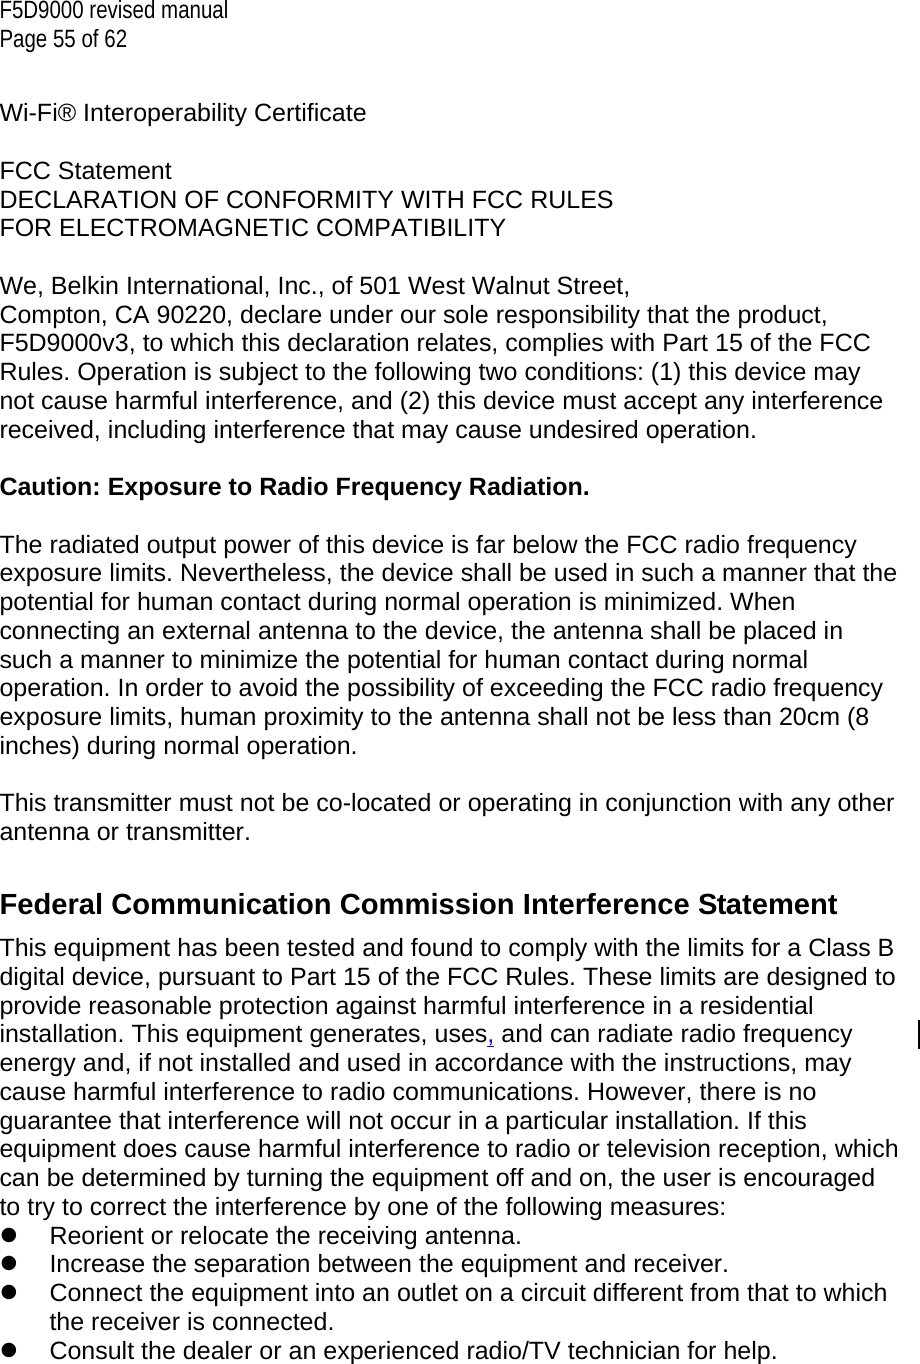 F5D9000 revised manual Page 55 of 62  Wi-Fi® Interoperability Certificate  FCC Statement DECLARATION OF CONFORMITY WITH FCC RULES FOR ELECTROMAGNETIC COMPATIBILITY  We, Belkin International, Inc., of 501 West Walnut Street, Compton, CA 90220, declare under our sole responsibility that the product, F5D9000v3, to which this declaration relates, complies with Part 15 of the FCC Rules. Operation is subject to the following two conditions: (1) this device may not cause harmful interference, and (2) this device must accept any interference received, including interference that may cause undesired operation.  Caution: Exposure to Radio Frequency Radiation.  The radiated output power of this device is far below the FCC radio frequency exposure limits. Nevertheless, the device shall be used in such a manner that the potential for human contact during normal operation is minimized. When connecting an external antenna to the device, the antenna shall be placed in such a manner to minimize the potential for human contact during normal operation. In order to avoid the possibility of exceeding the FCC radio frequency exposure limits, human proximity to the antenna shall not be less than 20cm (8 inches) during normal operation.  This transmitter must not be co-located or operating in conjunction with any other antenna or transmitter.  Federal Communication Commission Interference Statement This equipment has been tested and found to comply with the limits for a Class B digital device, pursuant to Part 15 of the FCC Rules. These limits are designed to provide reasonable protection against harmful interference in a residential installation. This equipment generates, uses, and can radiate radio frequency energy and, if not installed and used in accordance with the instructions, may cause harmful interference to radio communications. However, there is no guarantee that interference will not occur in a particular installation. If this equipment does cause harmful interference to radio or television reception, which can be determined by turning the equipment off and on, the user is encouraged to try to correct the interference by one of the following measures:   Reorient or relocate the receiving antenna.   Increase the separation between the equipment and receiver.   Connect the equipment into an outlet on a circuit different from that to which the receiver is connected.   Consult the dealer or an experienced radio/TV technician for help.  